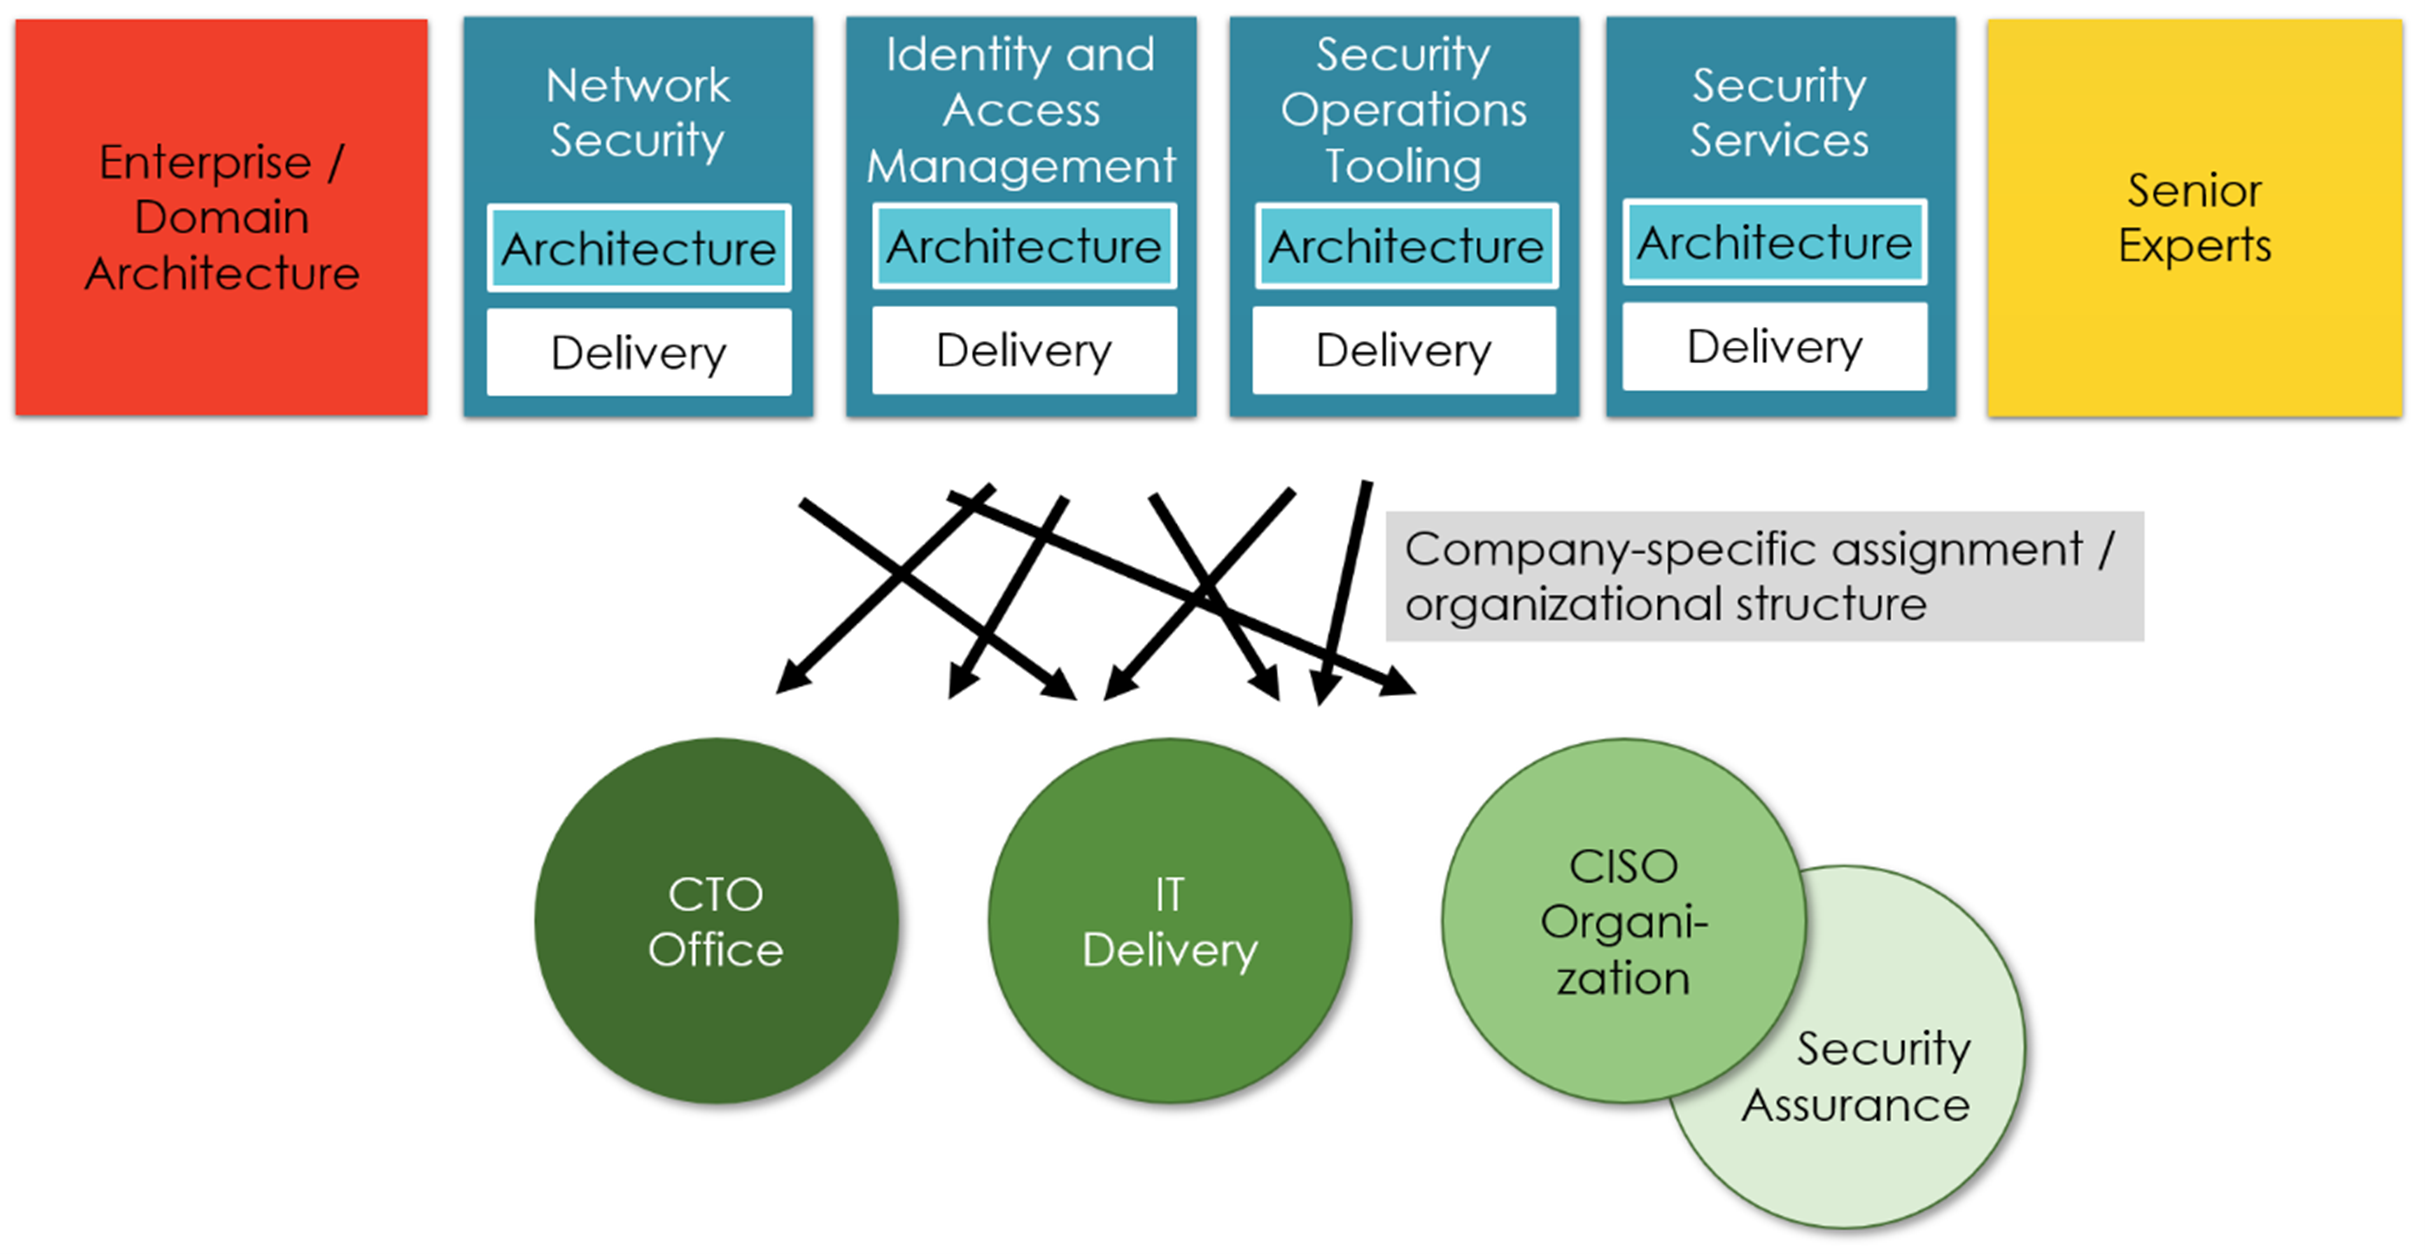 Figure 2 - Architectural roles, delivery teams, and teams with security architects